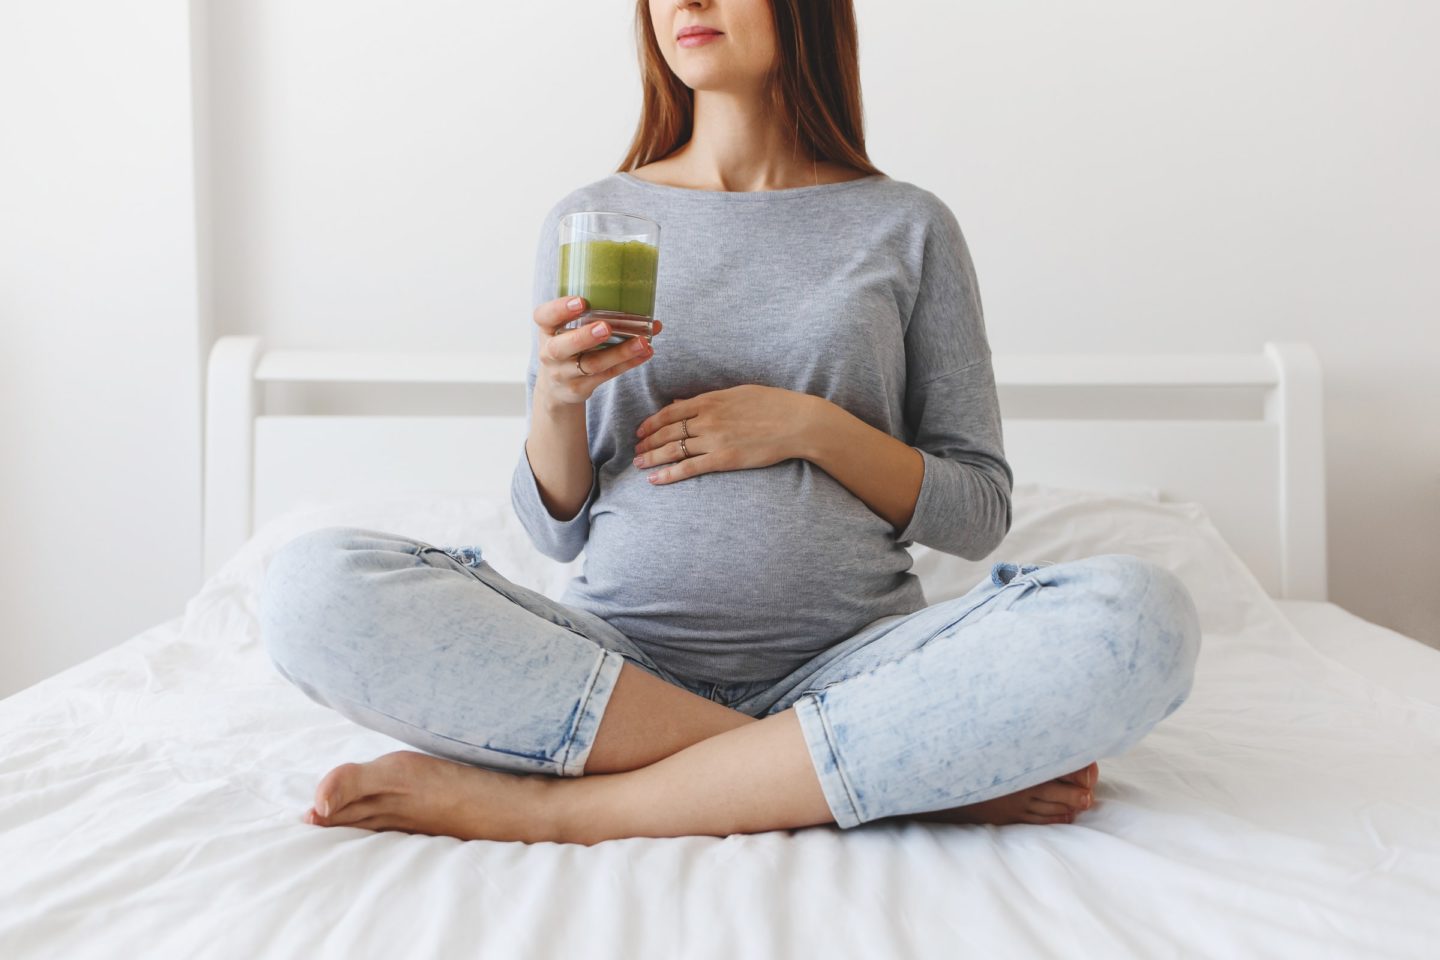 spinach juice for pregnant women